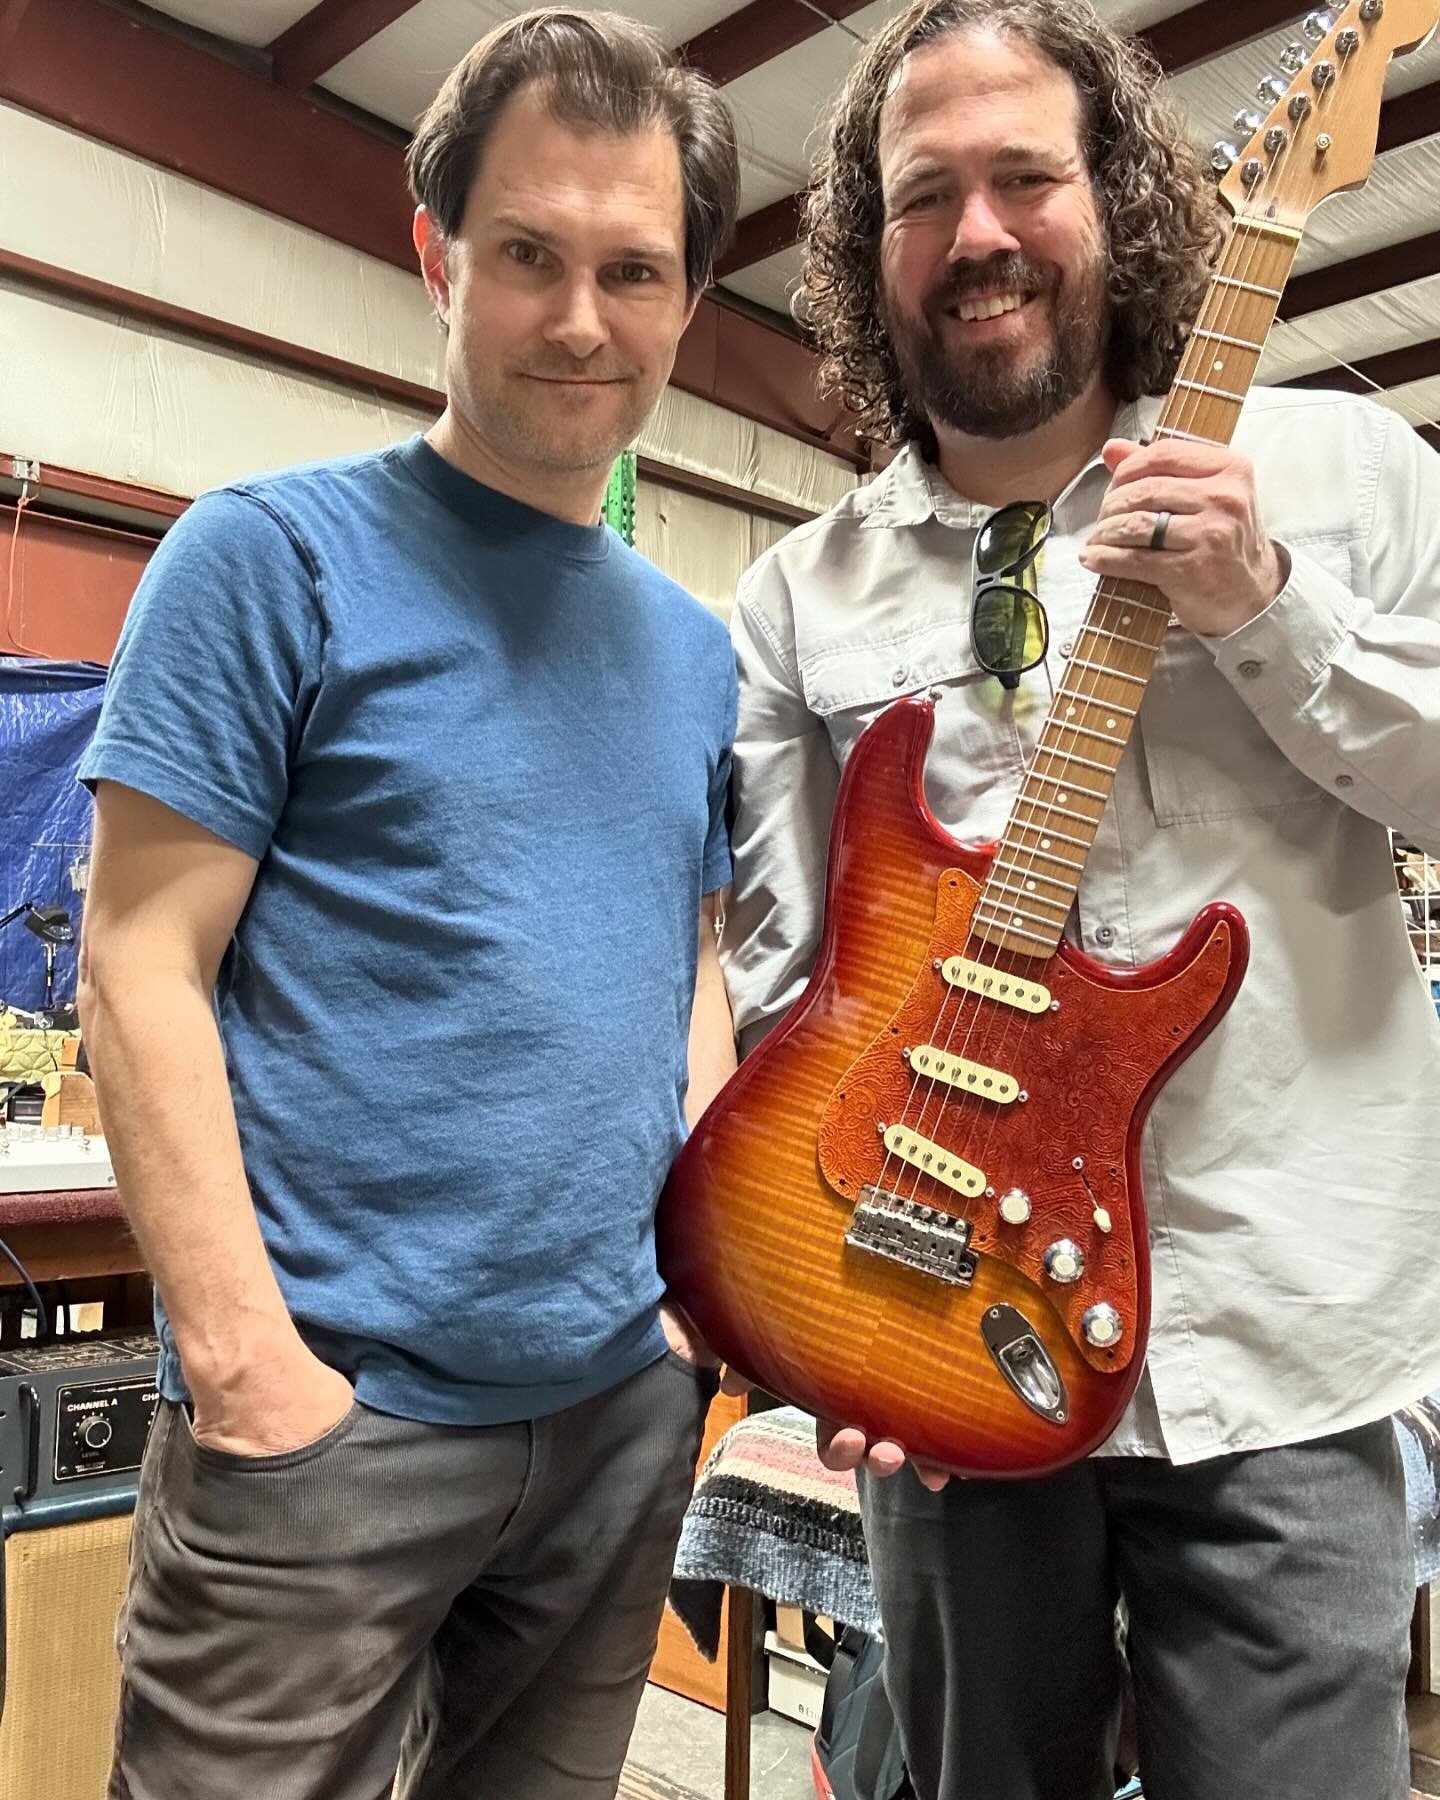 Took the Strat that I recently posted into @micahmandolundy. Micah made an absolutely stellar custom leather pickguard for it. It&rsquo;s right at home on this instrument. Hit Micah up if you want one for your guitar.  BTW, playing a free show at @op